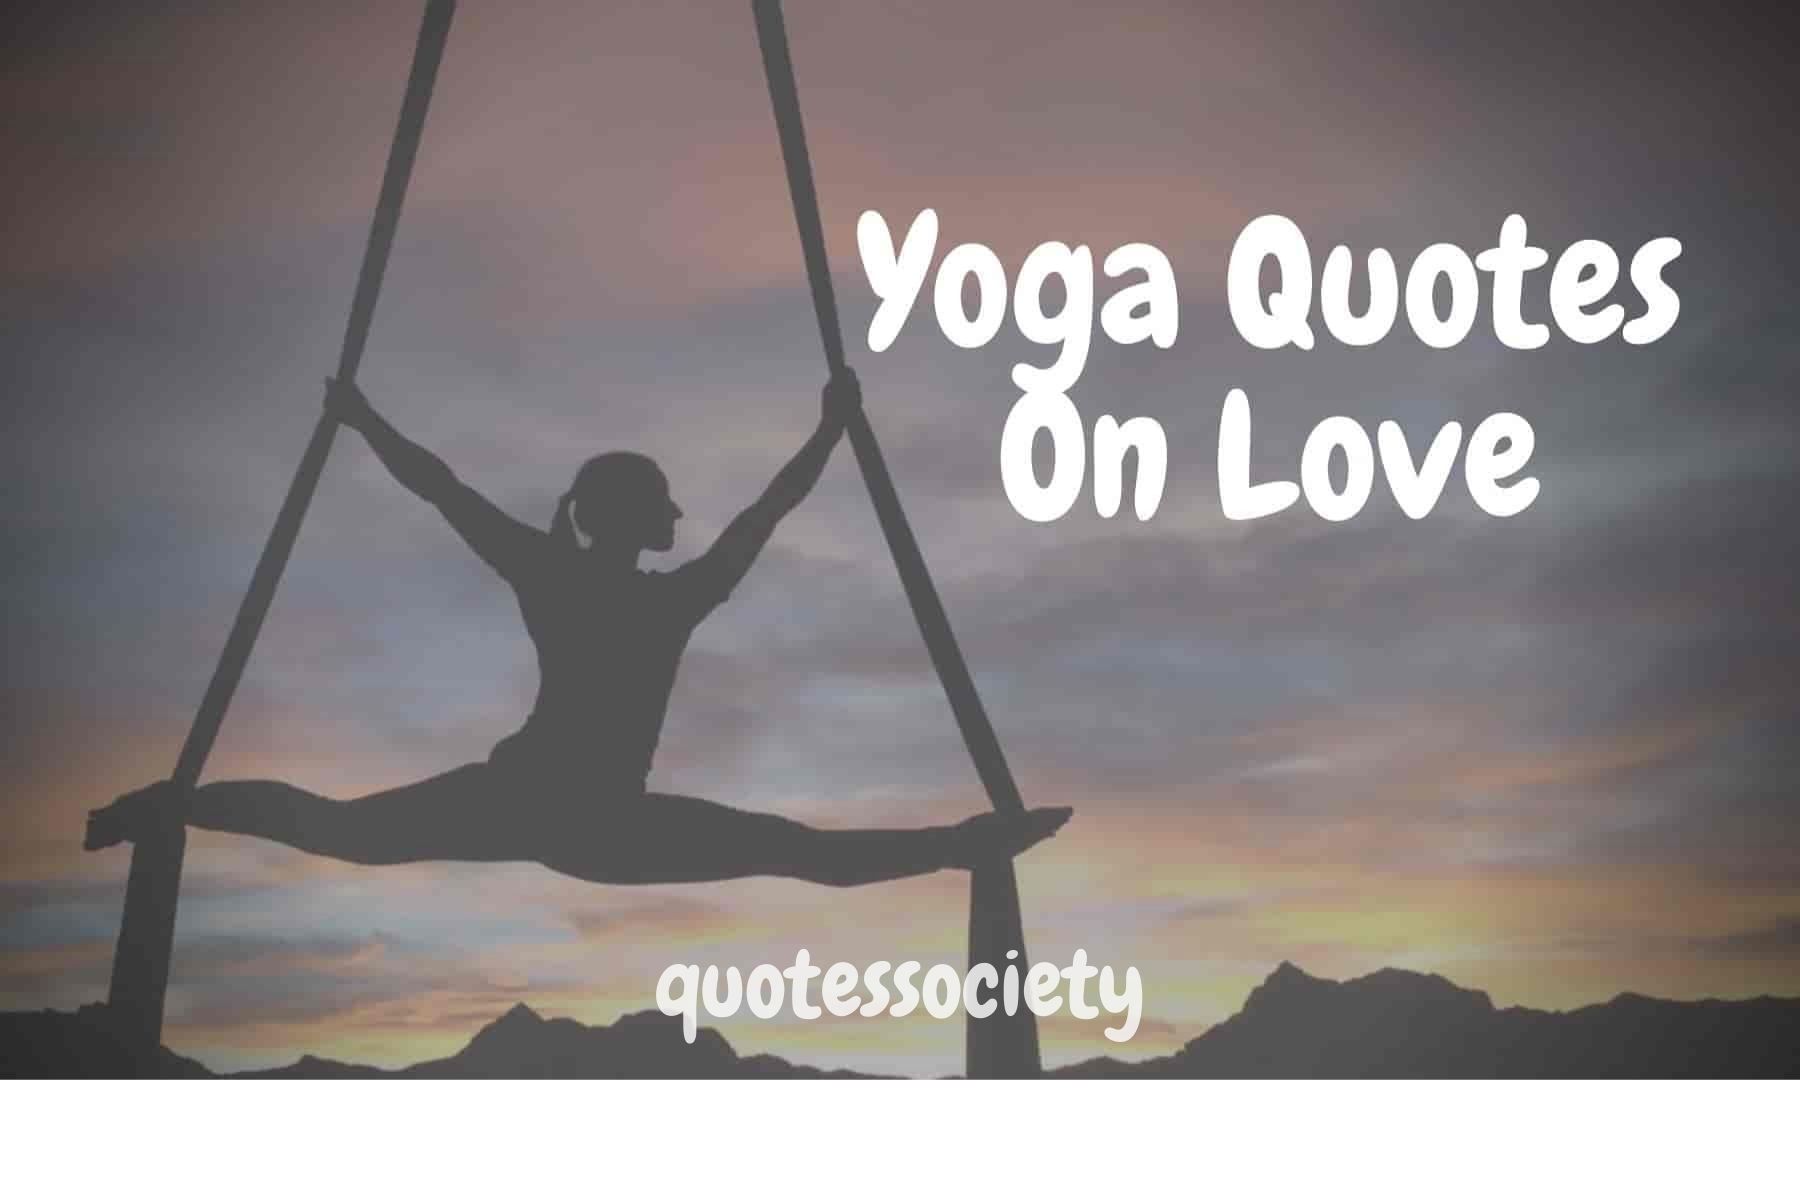 Couple yoga with pickup lines or love quotes